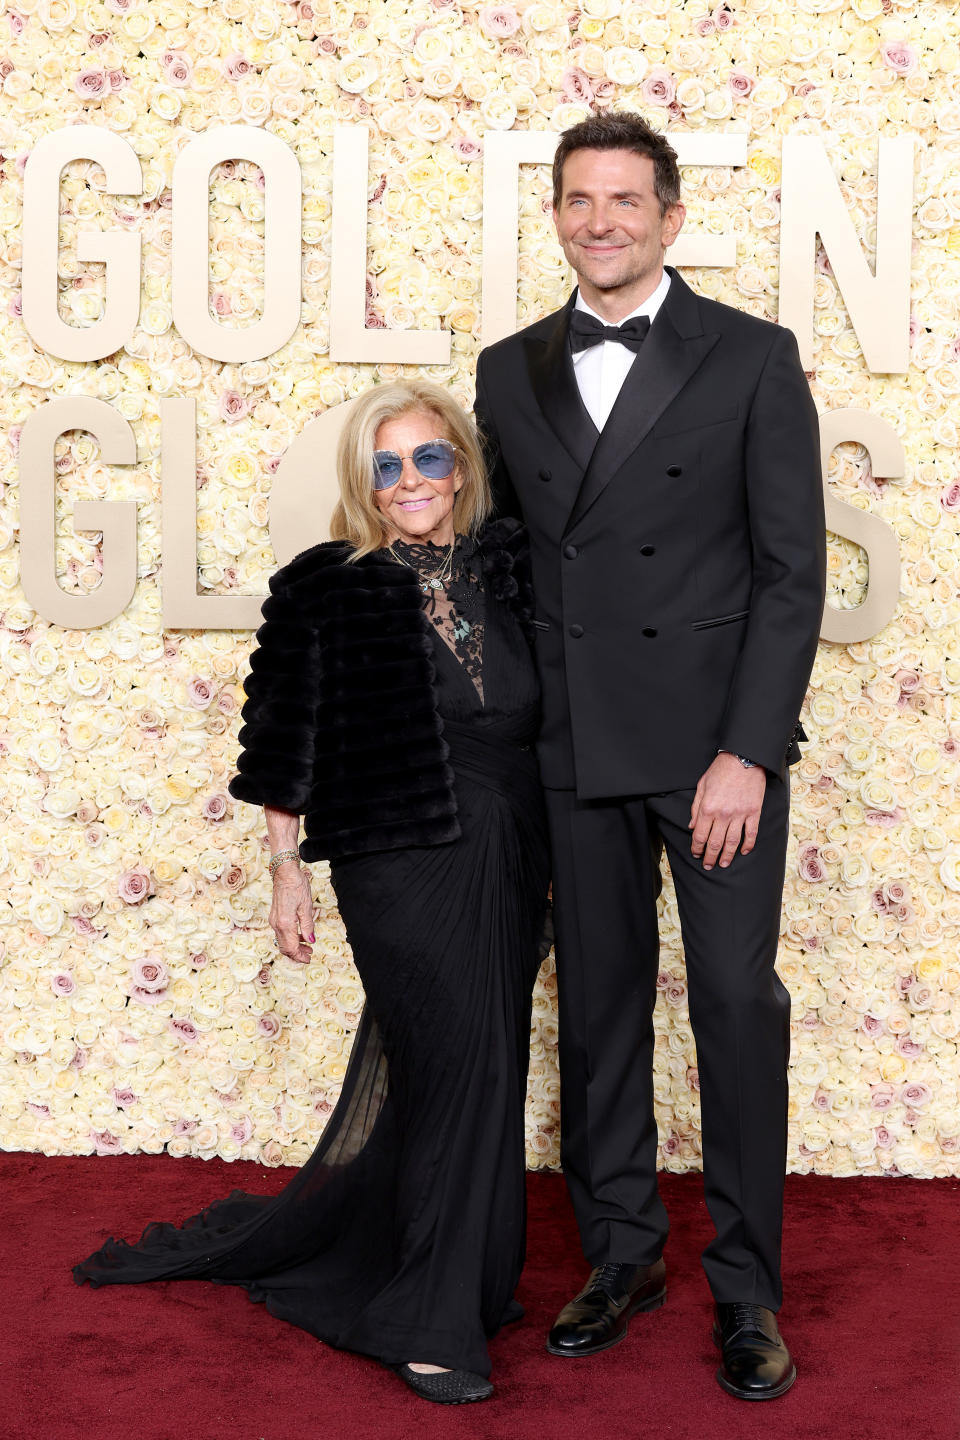 BEVERLY HILLS, CALIFORNIA - JANUARY 07: (L-R) Gloria Campano and Bradley Cooper attend the 81st Annual Golden Globe Awards at The Beverly Hilton on January 07, 2024 in Beverly Hills, California. (Photo by Monica Schipper/GA/The Hollywood Reporter via Getty Images)